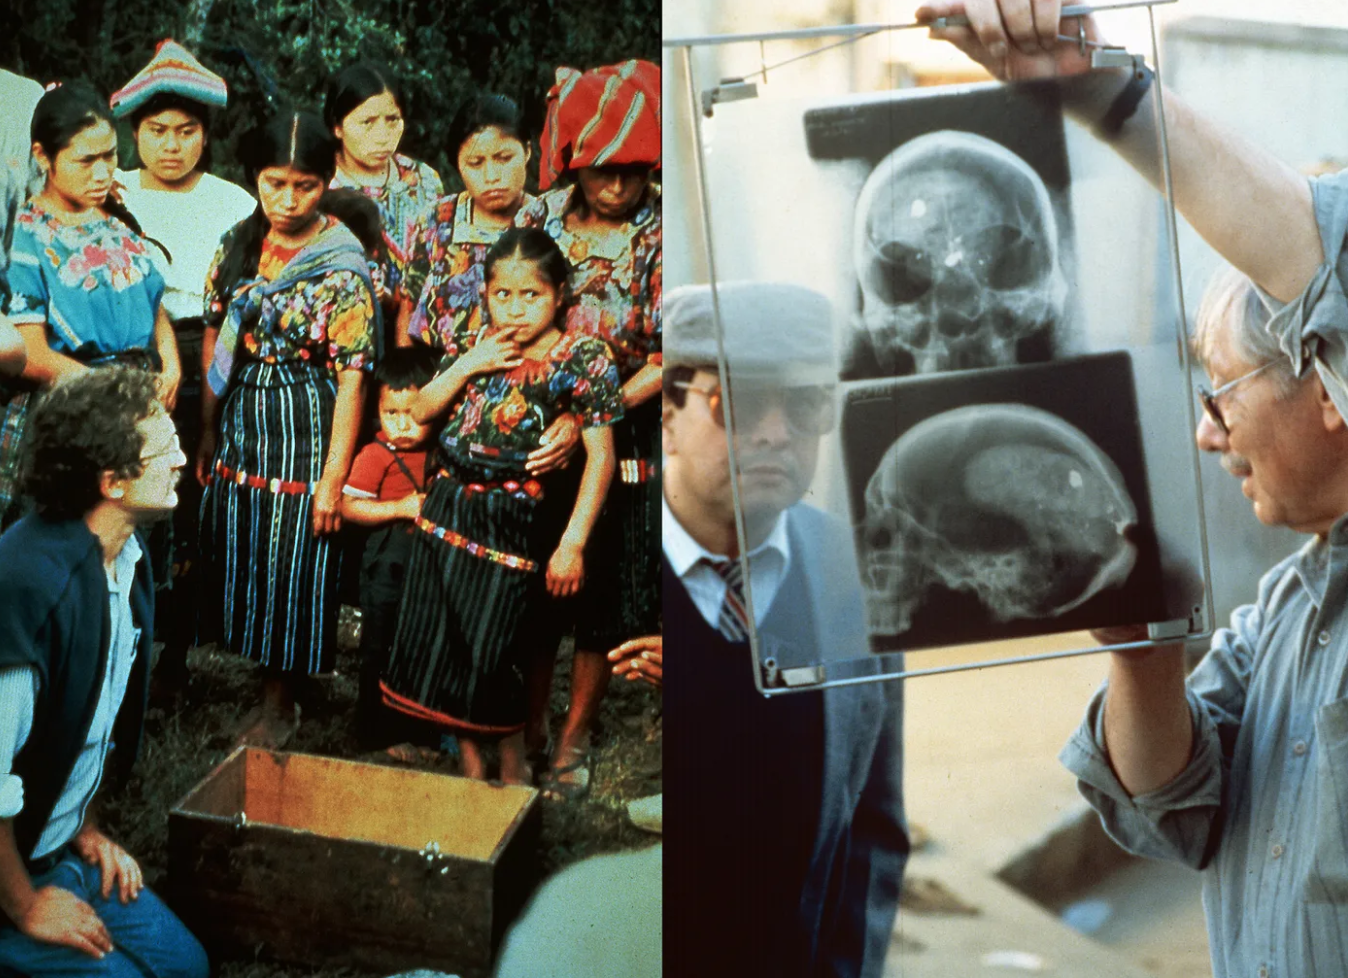 Left: Eric Stover at the first exhumation of a mass grave near Chichicastenango, Guatemala in the early 1990s. It was believed to contain the remains of villagers who had been executed by the military. He is asking permission, from family members who believe the grave contains their loved ones, to remove the remains so they can be taken to a hospital to be examined. Right: Forensic anthropologist Clyde Snow shows a Guatemalan judge bullet fragments embedded in the skull of one of the first victims exhumed from unmarked graves near Chichicastenango. Photos by Photo by Pamela Blotner & Eric Stover.